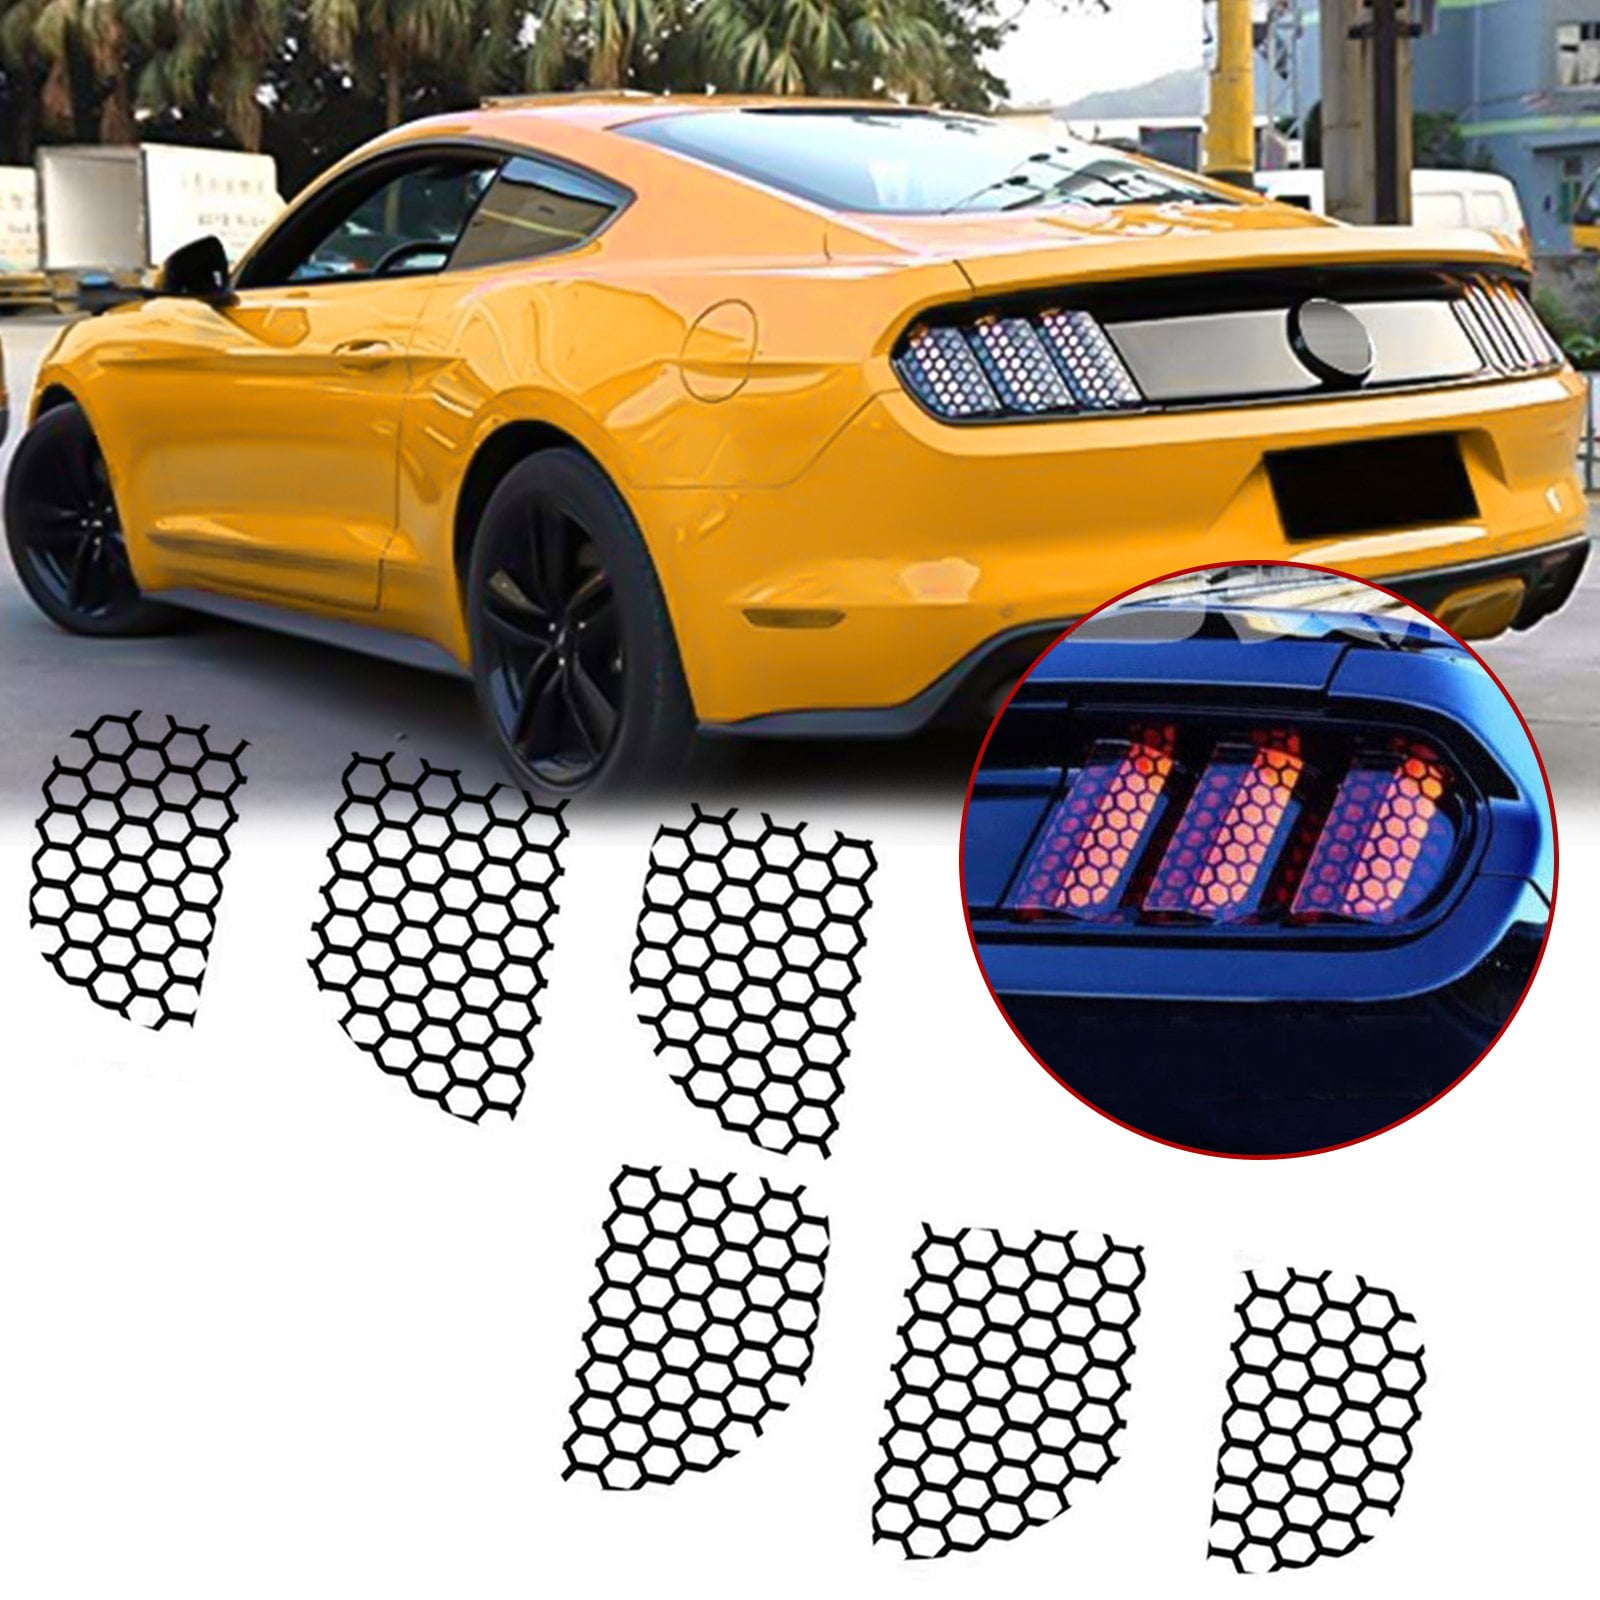 43 Popular Mustang exterior accessories Trend in This Years